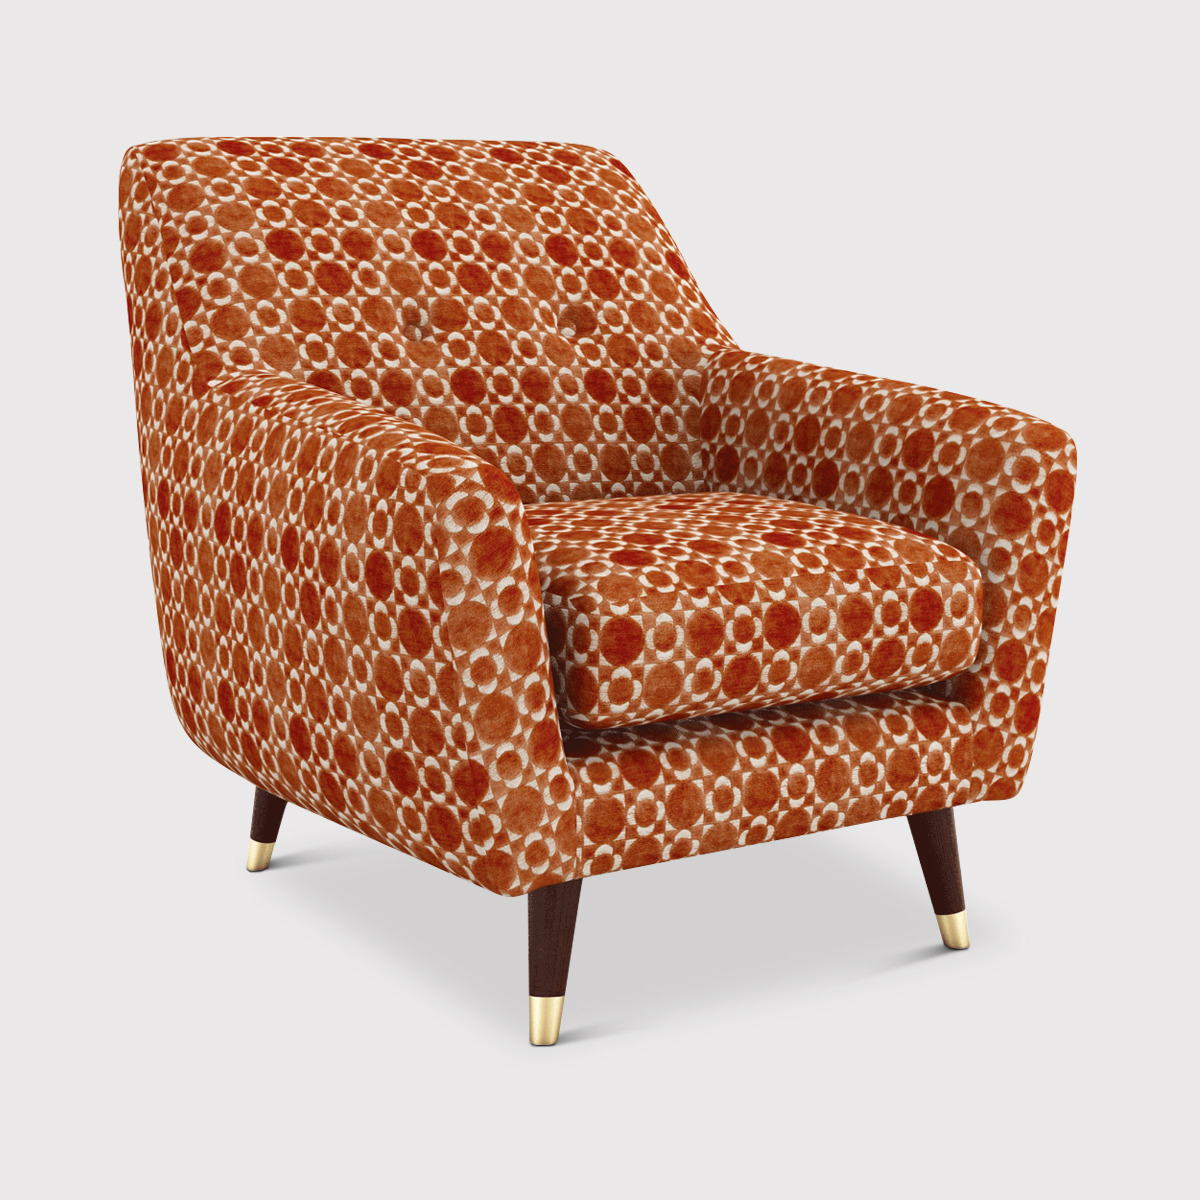 Orla Kiely Rose Armchair, Red Fabric - Barker & Stonehouse - image 1